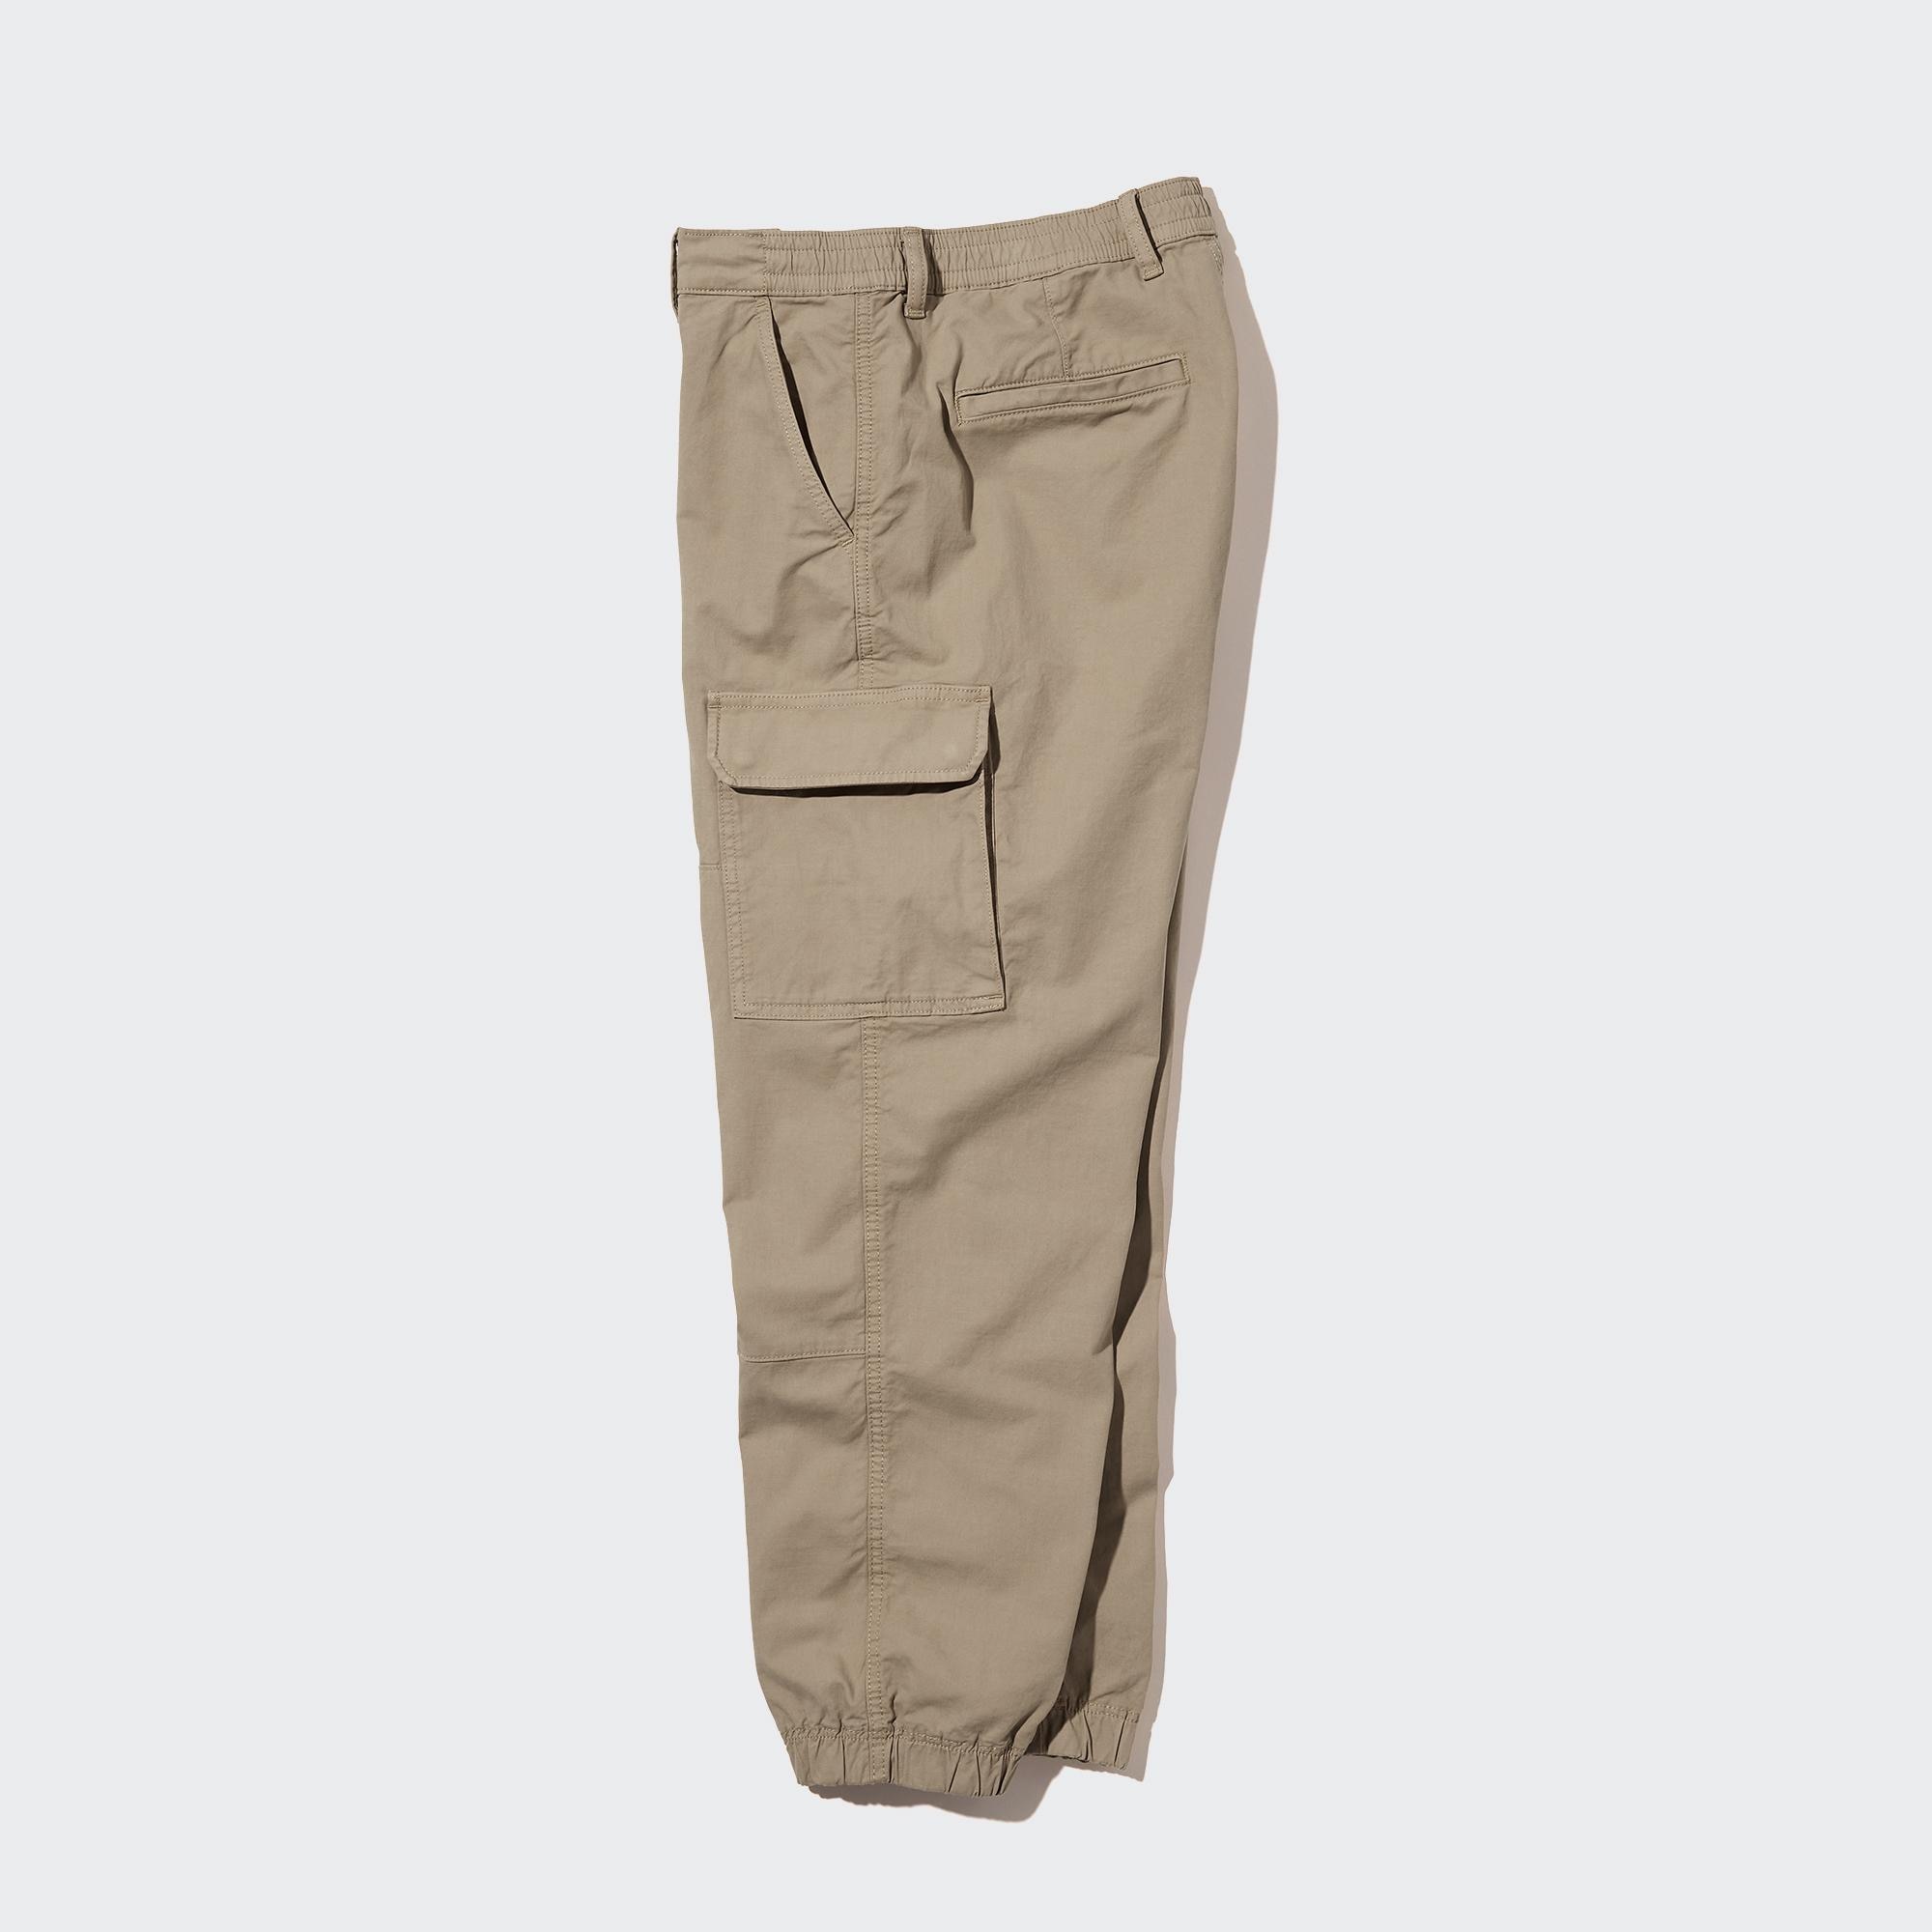 Amazon.com: Joggers With Belt Loops